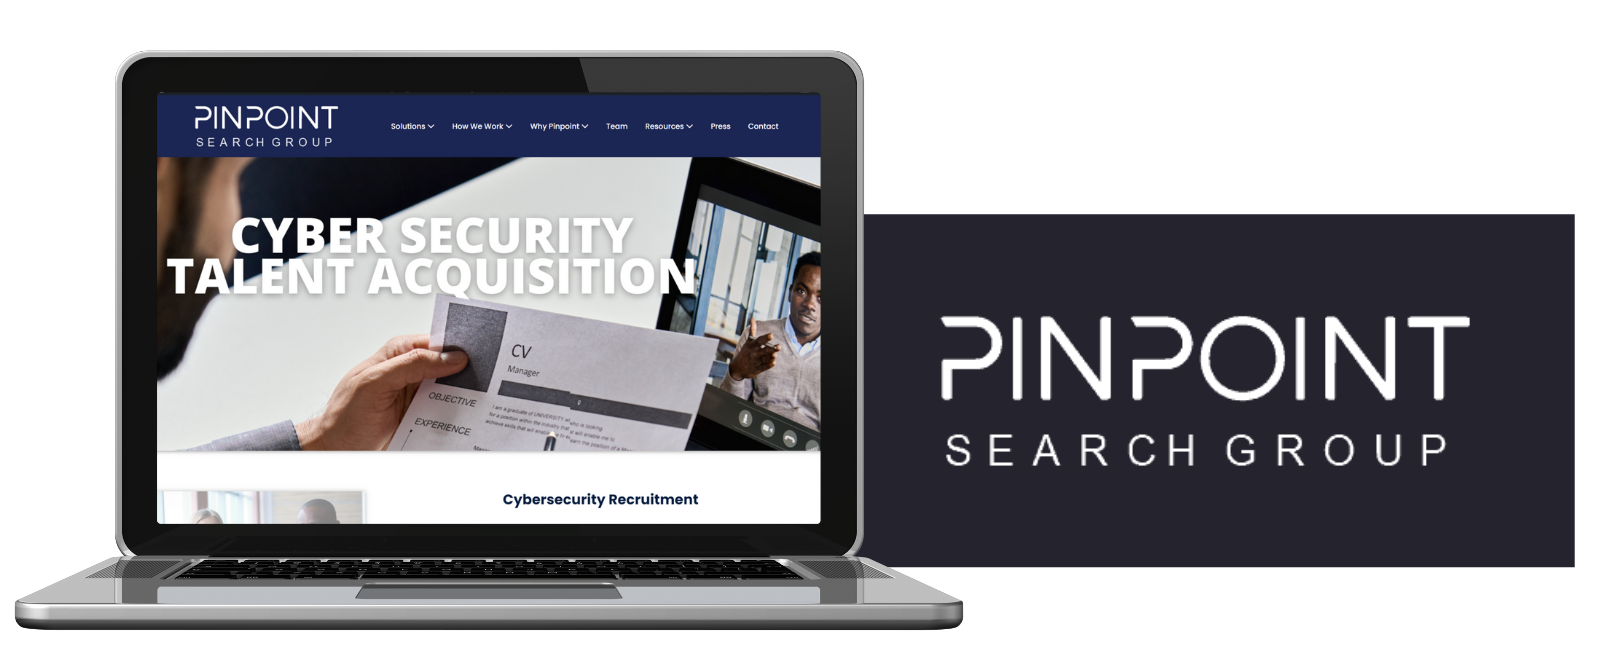 Client: Pinpoint Search Group